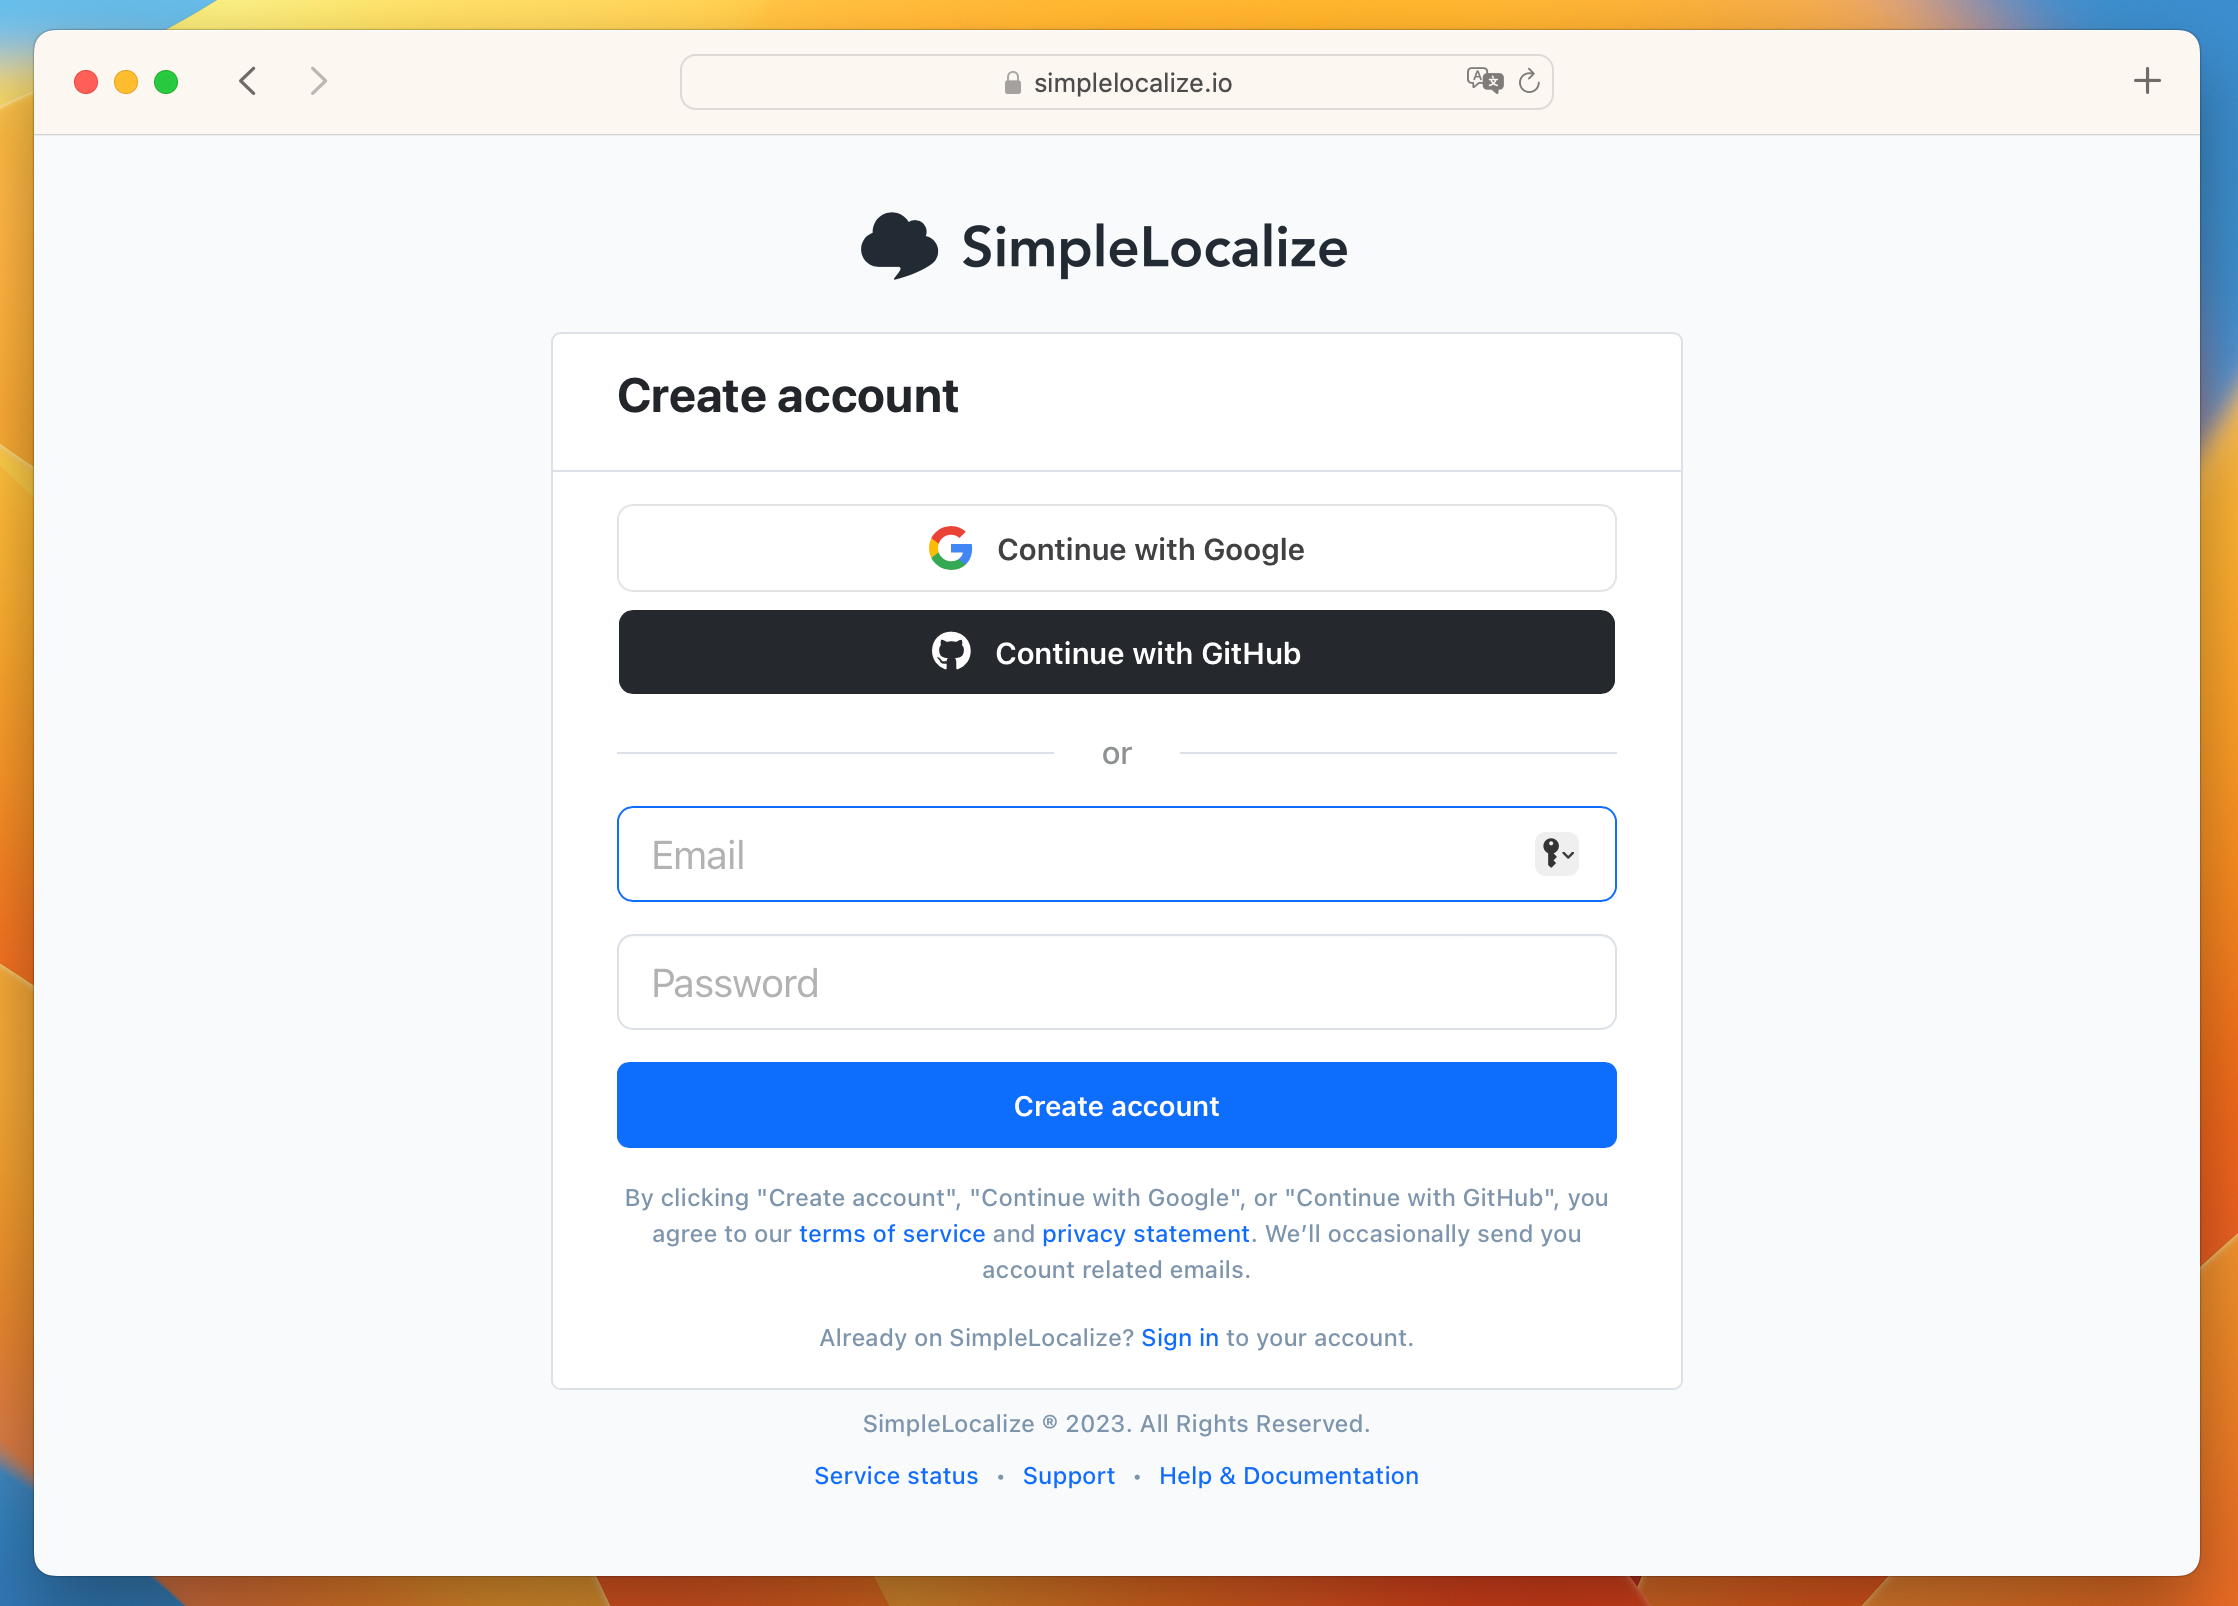 Sign up to SimpleLocalize